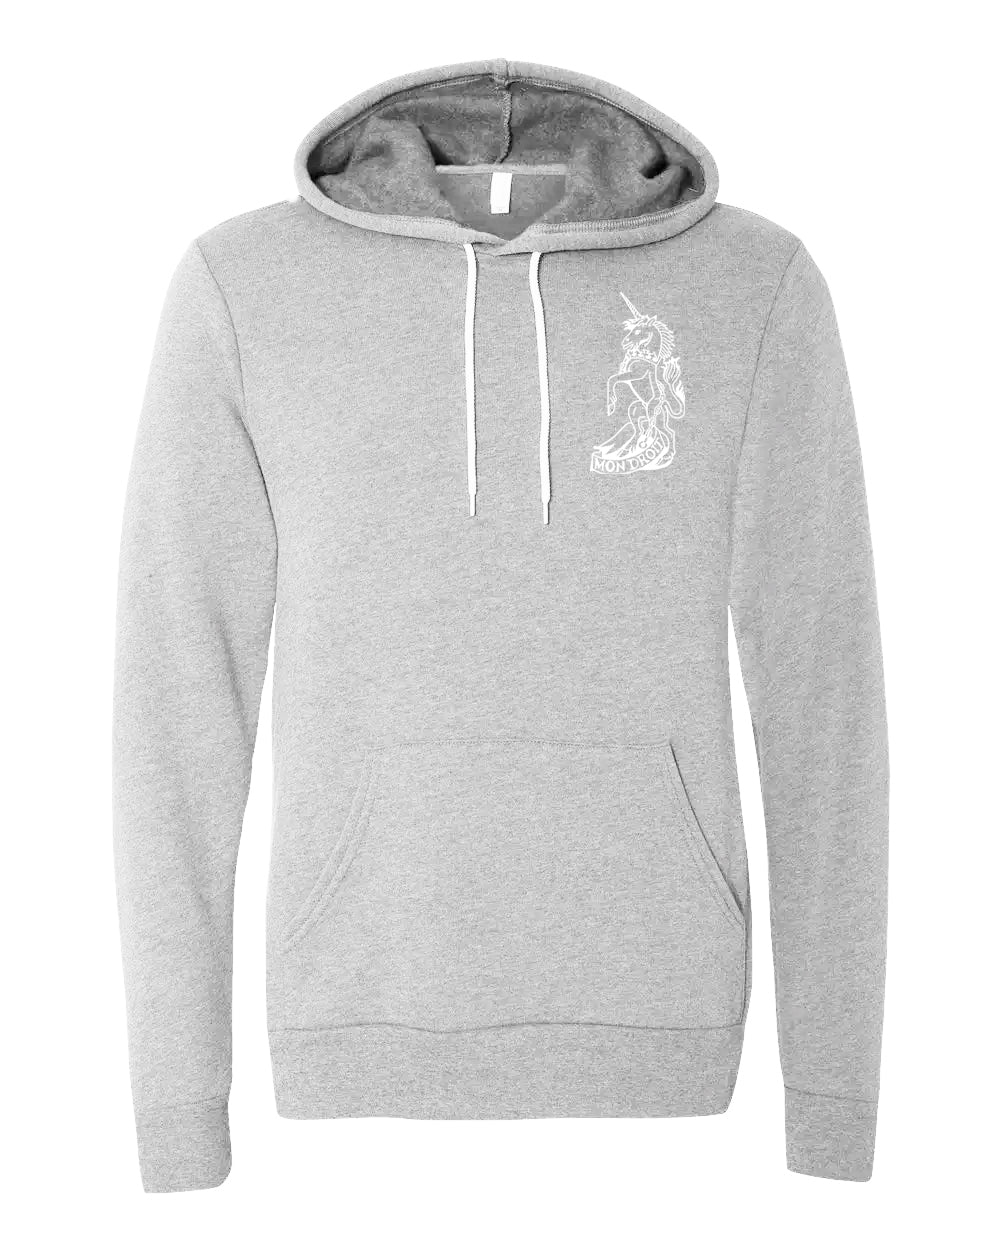 SHACKLED UNICORN CREST Hoodies | Unsettled Apparel